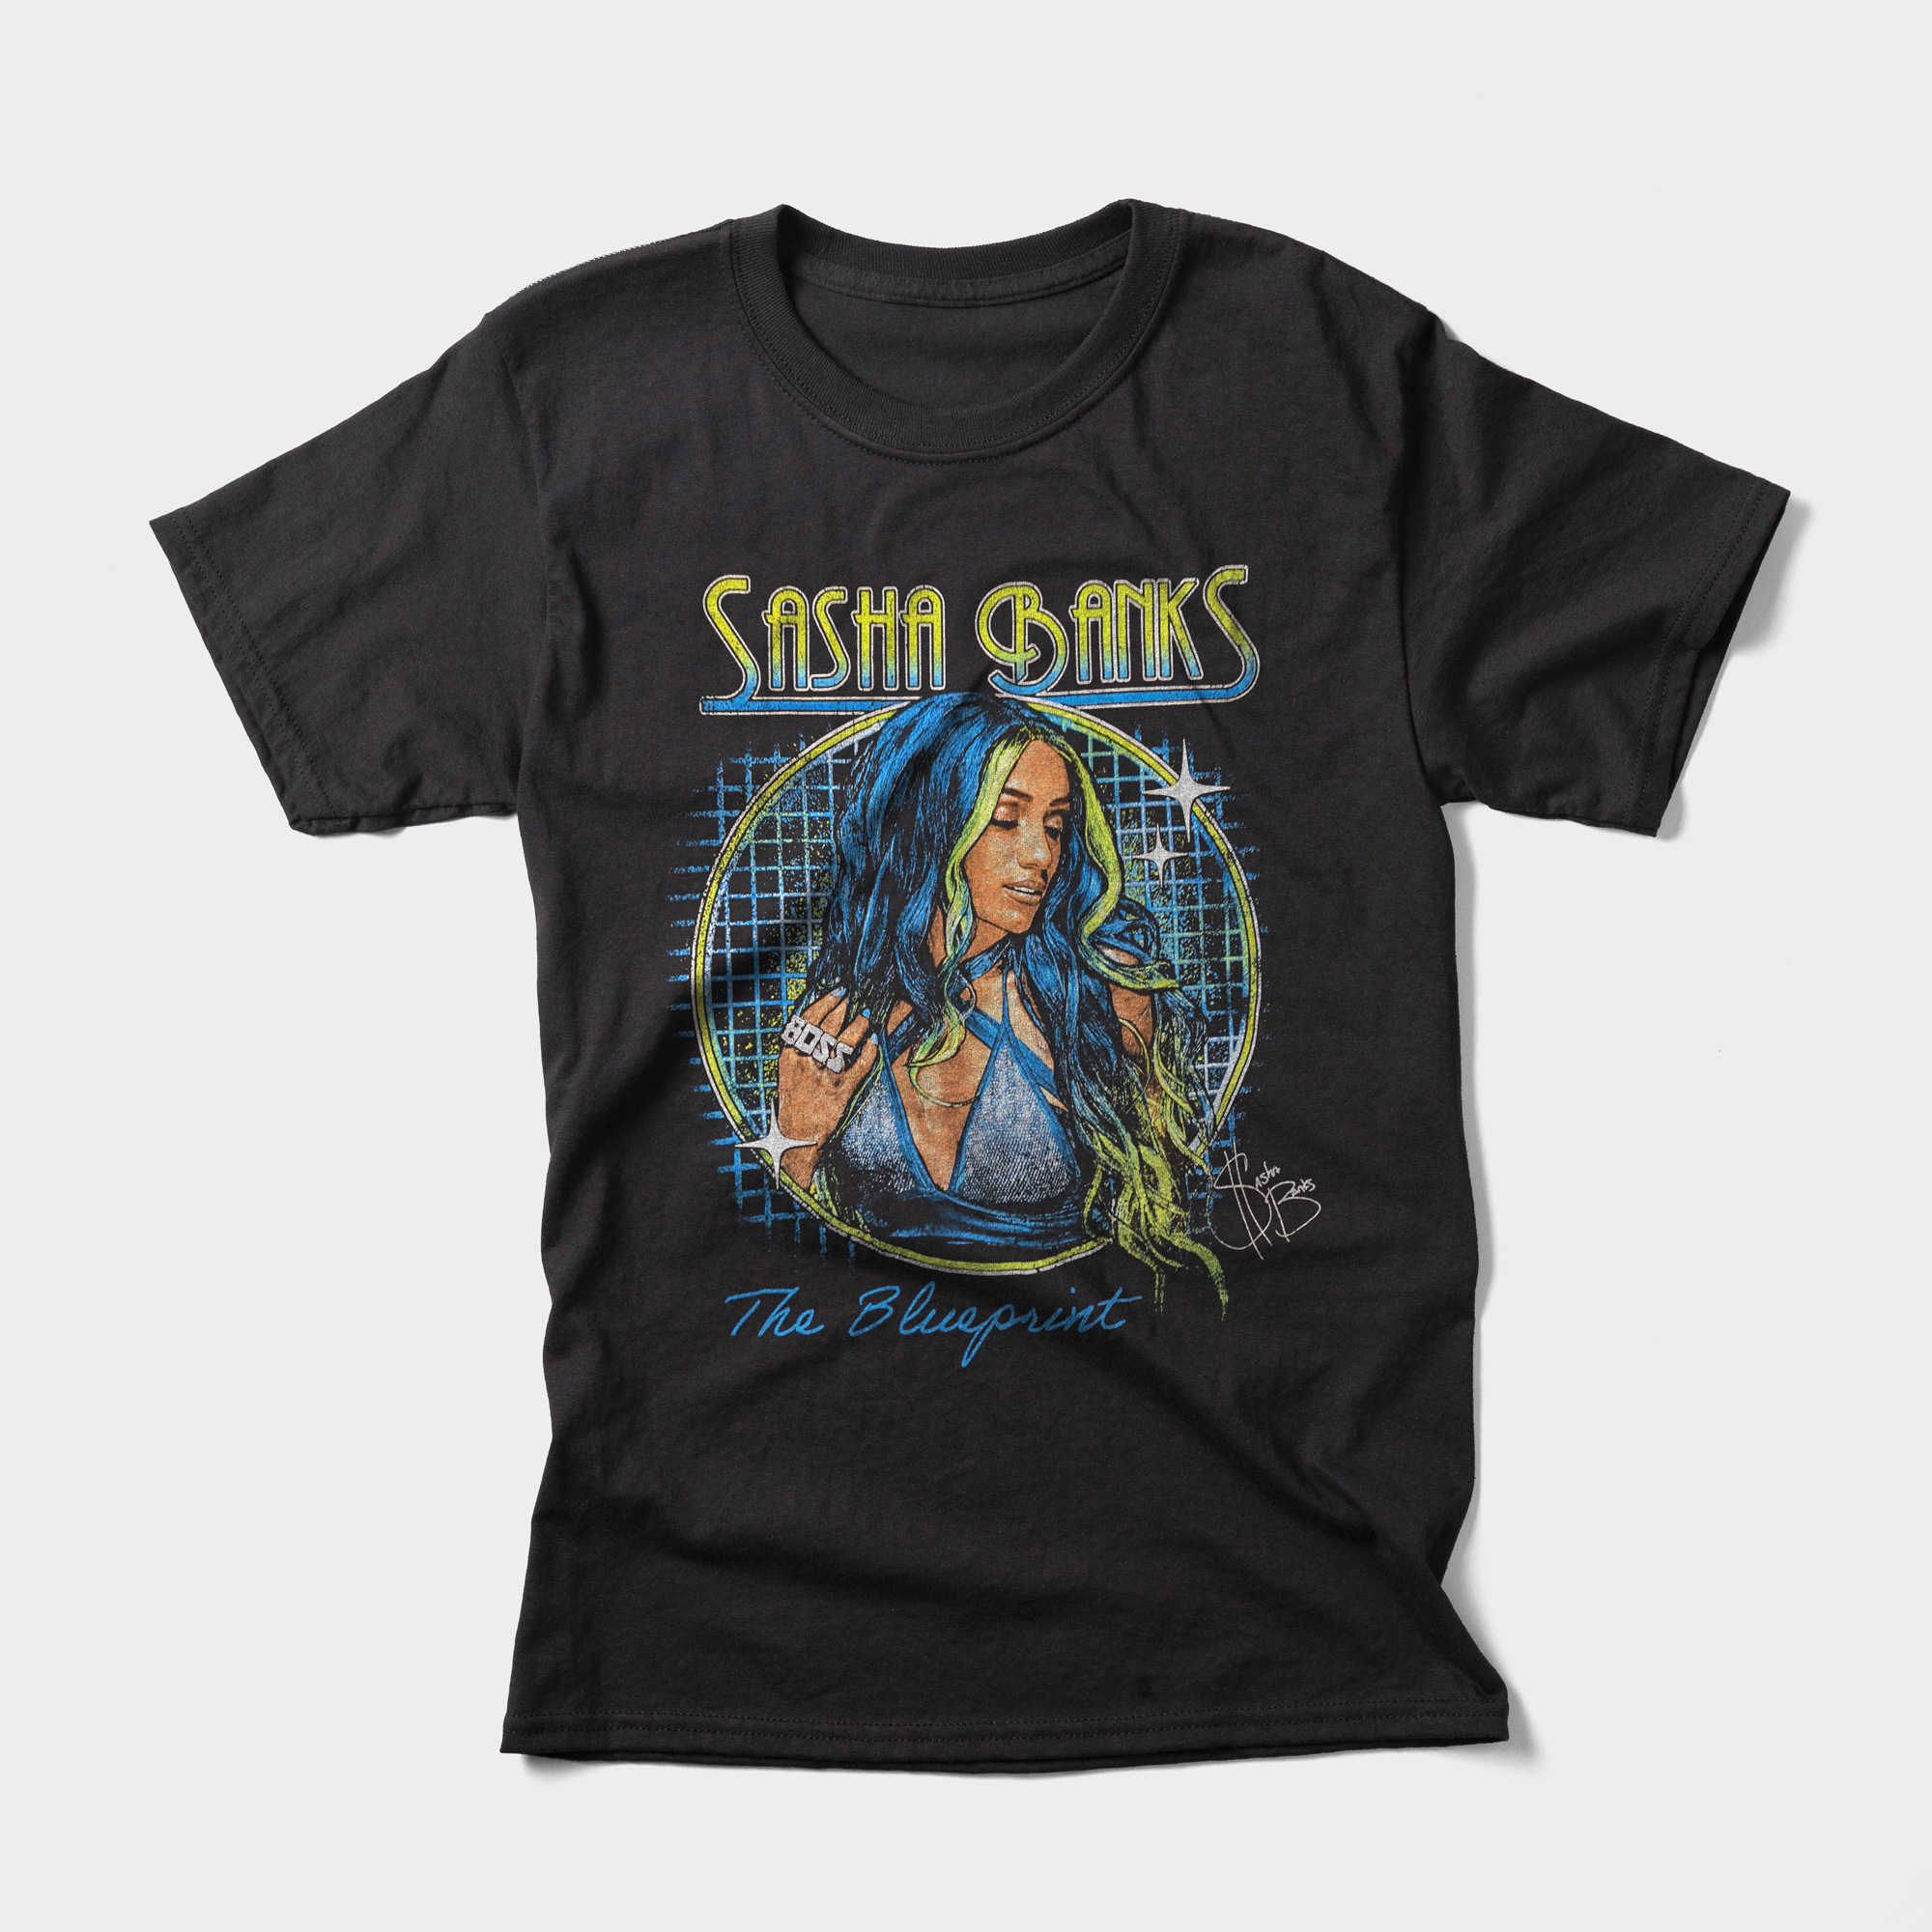 Sasha Banks' The Blueprint t-shirt reminds us of her incredible and groundbreaking time in WWE. 